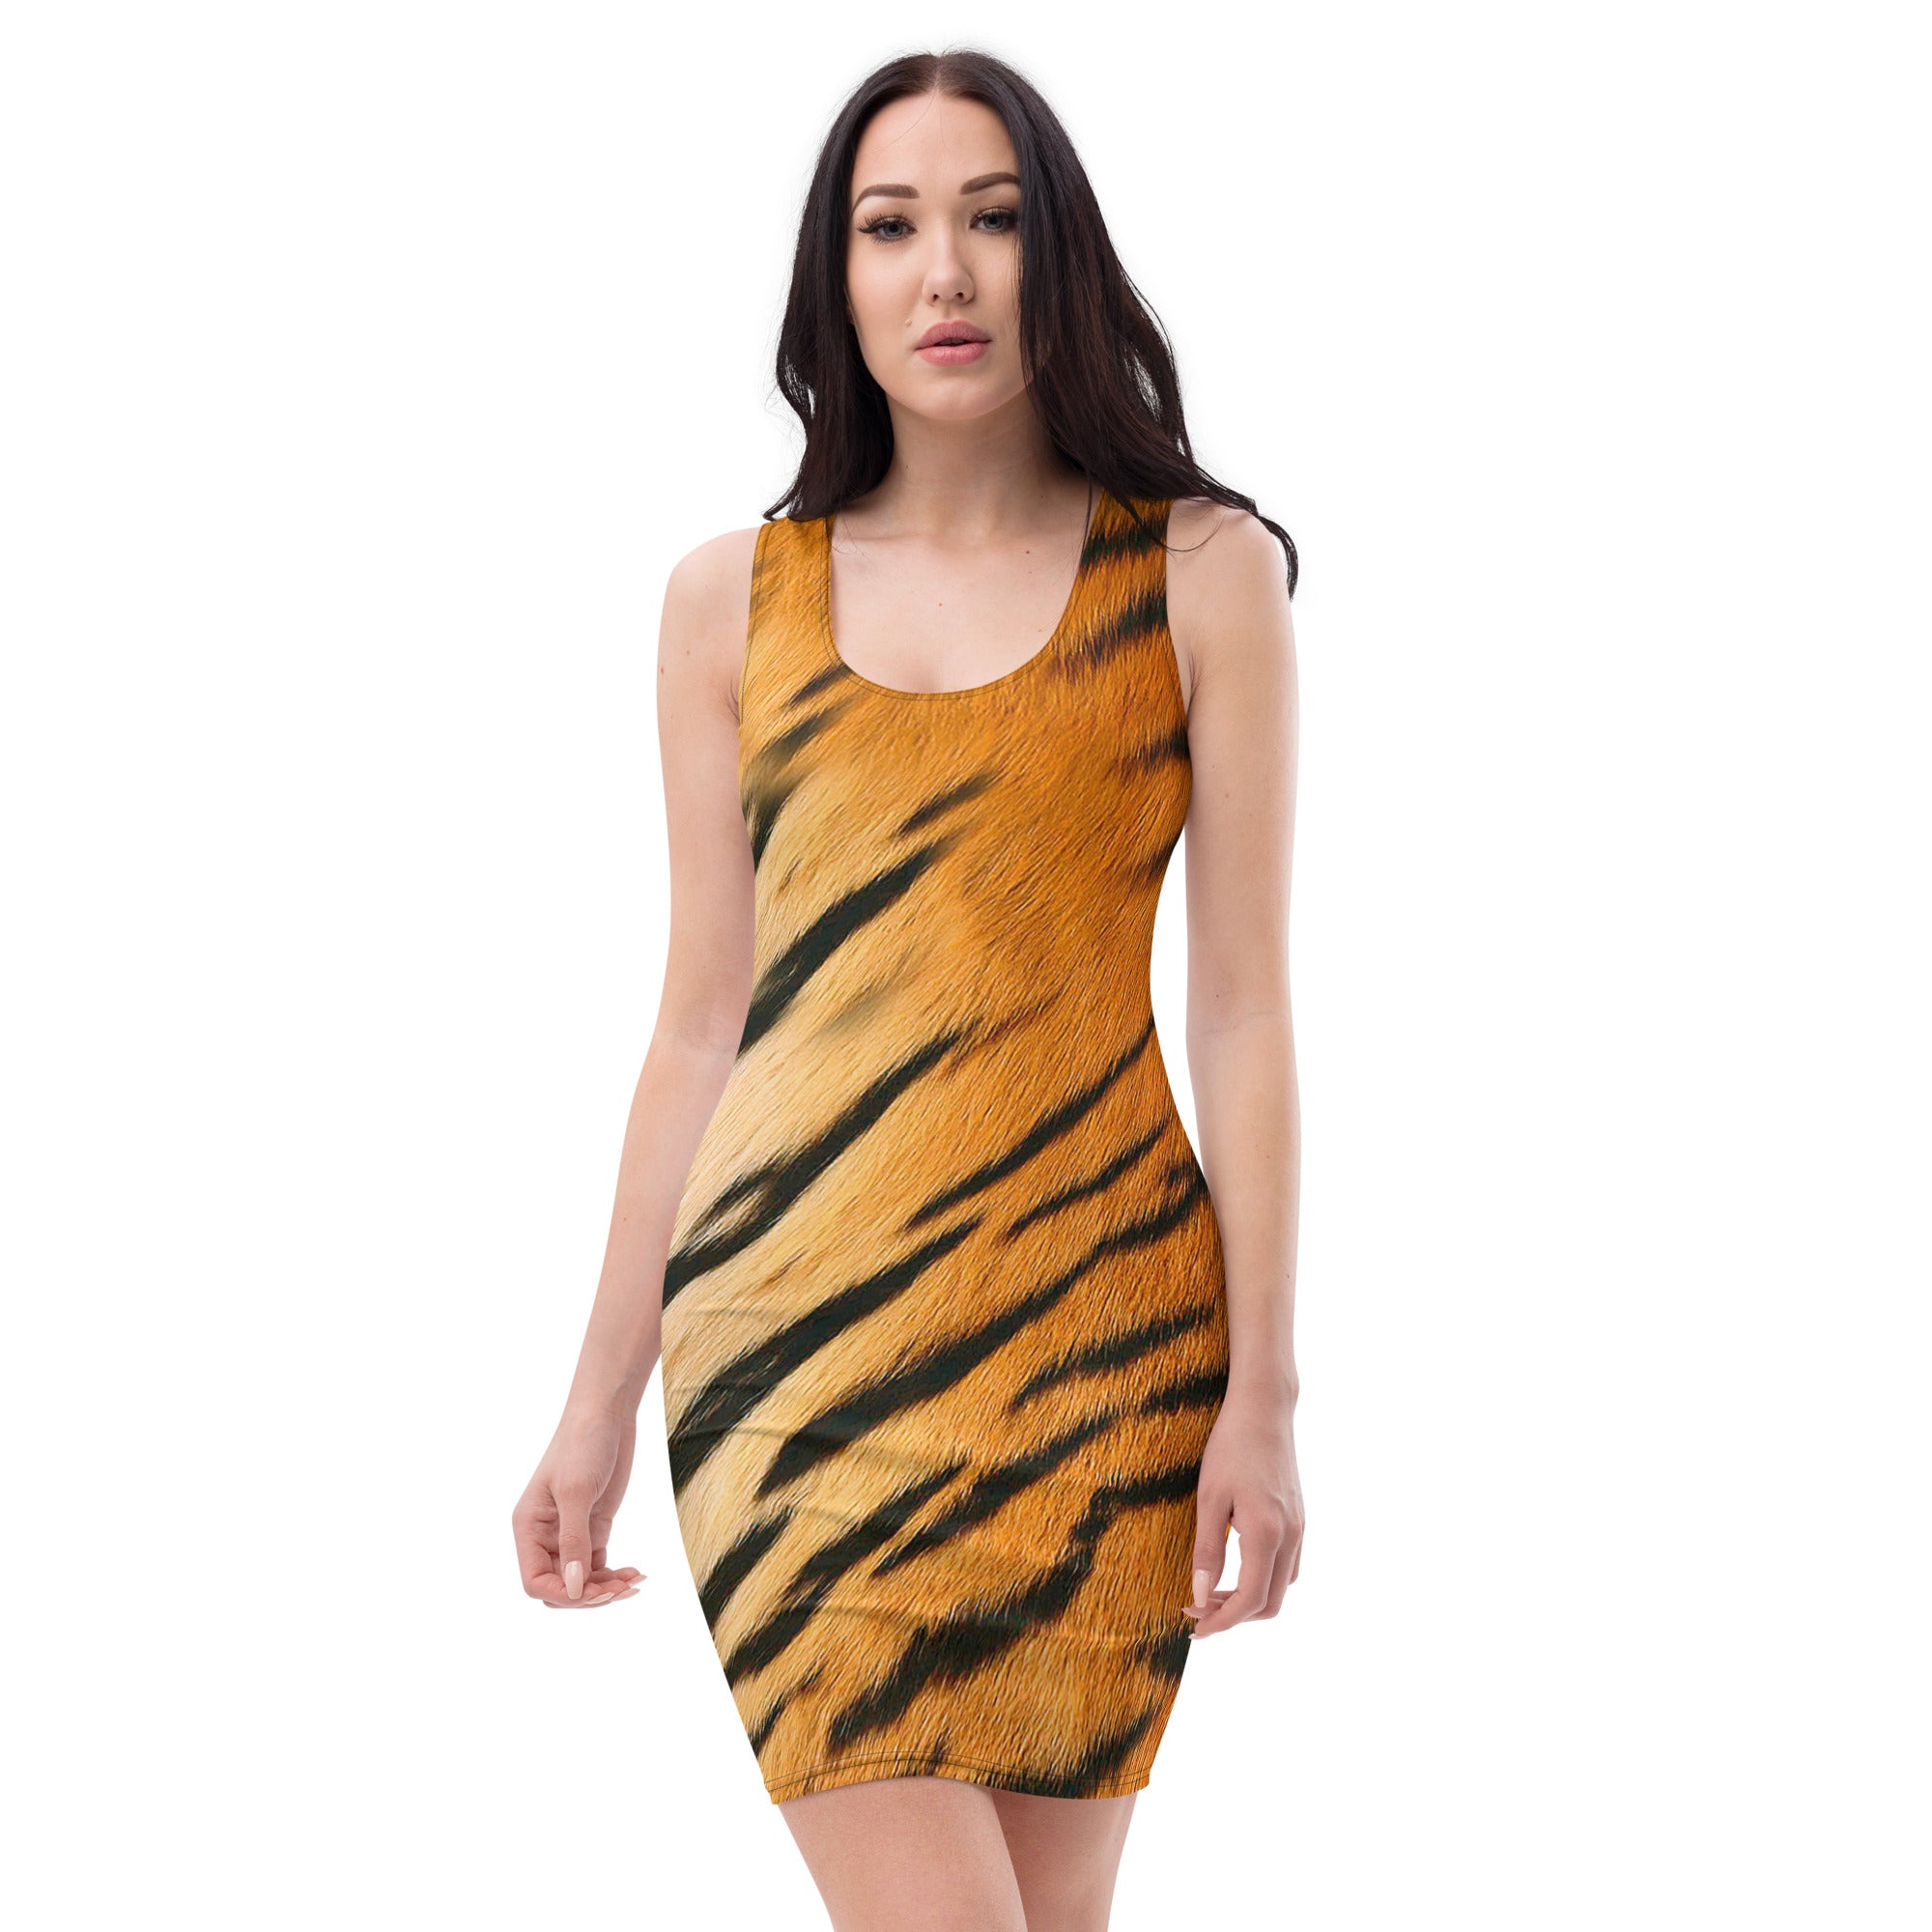 Roar with Style in Our Fierce Tiger Print Fitted Dress, lioness-love